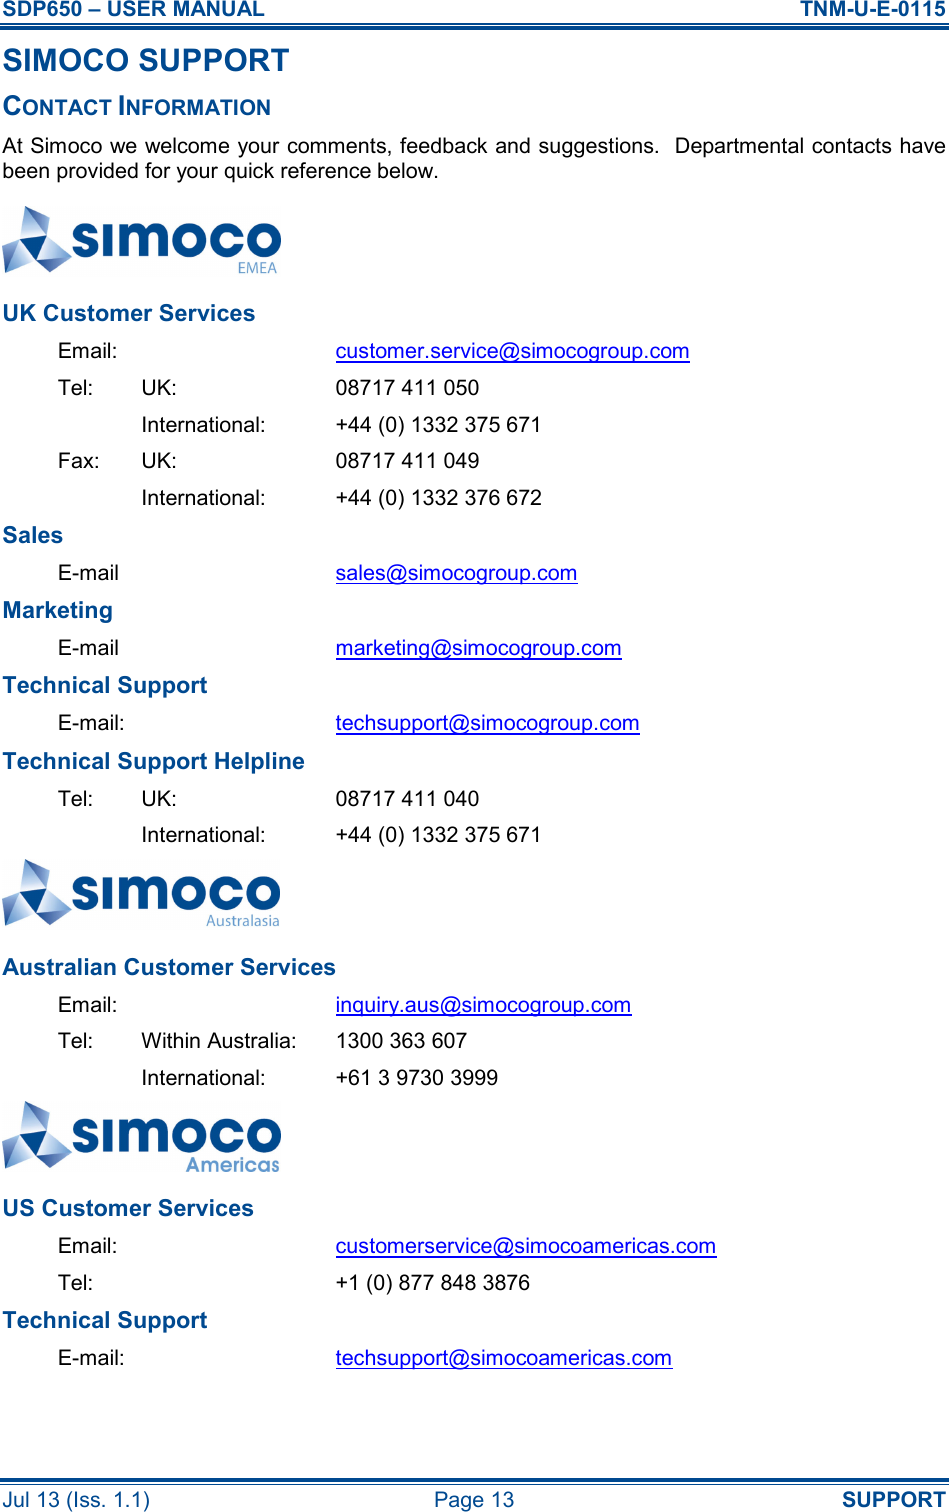 SDP650 – USER MANUAL  TNM-U-E-0115 Jul 13 (Iss. 1.1)  Page 13  SUPPORT SIMOCO SUPPORT CONTACT INFORMATION At Simoco we welcome your comments, feedback and suggestions.  Departmental contacts have been provided for your quick reference below.  UK Customer Services Email:  customer.service@simocogroup.com Tel:  UK:  08717 411 050   International:  +44 (0) 1332 375 671 Fax:  UK:  08717 411 049   International:  +44 (0) 1332 376 672 Sales E-mail  sales@simocogroup.com Marketing E-mail  marketing@simocogroup.com Technical Support E-mail:  techsupport@simocogroup.com Technical Support Helpline Tel:  UK:  08717 411 040   International:  +44 (0) 1332 375 671  Australian Customer Services Email:  inquiry.aus@simocogroup.com Tel:  Within Australia:  1300 363 607   International:  +61 3 9730 3999  US Customer Services Email:  customerservice@simocoamericas.com Tel:    +1 (0) 877 848 3876 Technical Support E-mail:  techsupport@simocoamericas.com  